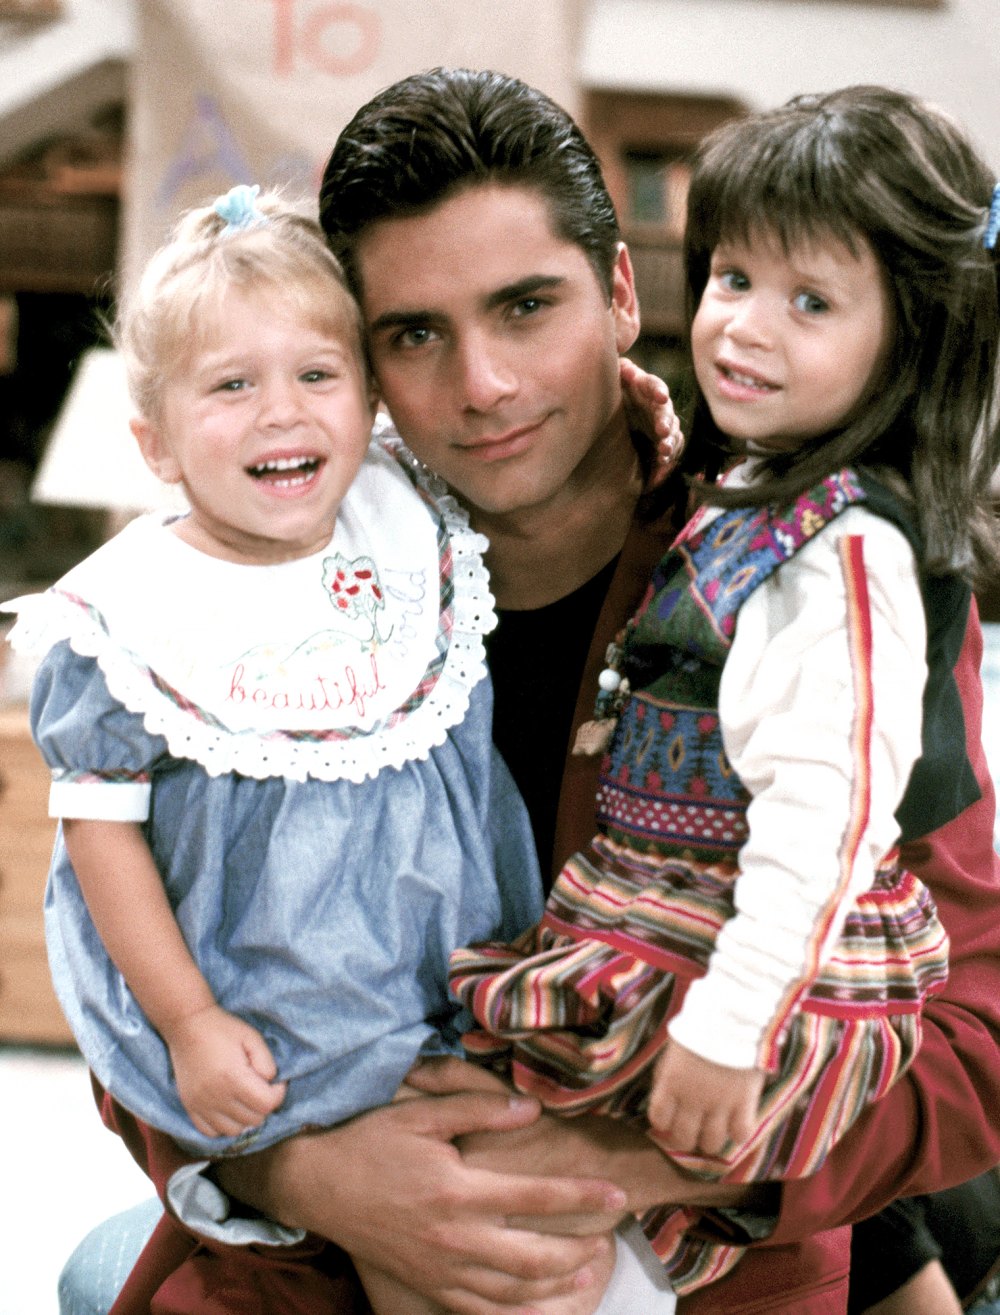 John Stamos Says Knowing Mary-Kate and Ashley Olsen Is ‘One of the Greatest Joys of My Life’